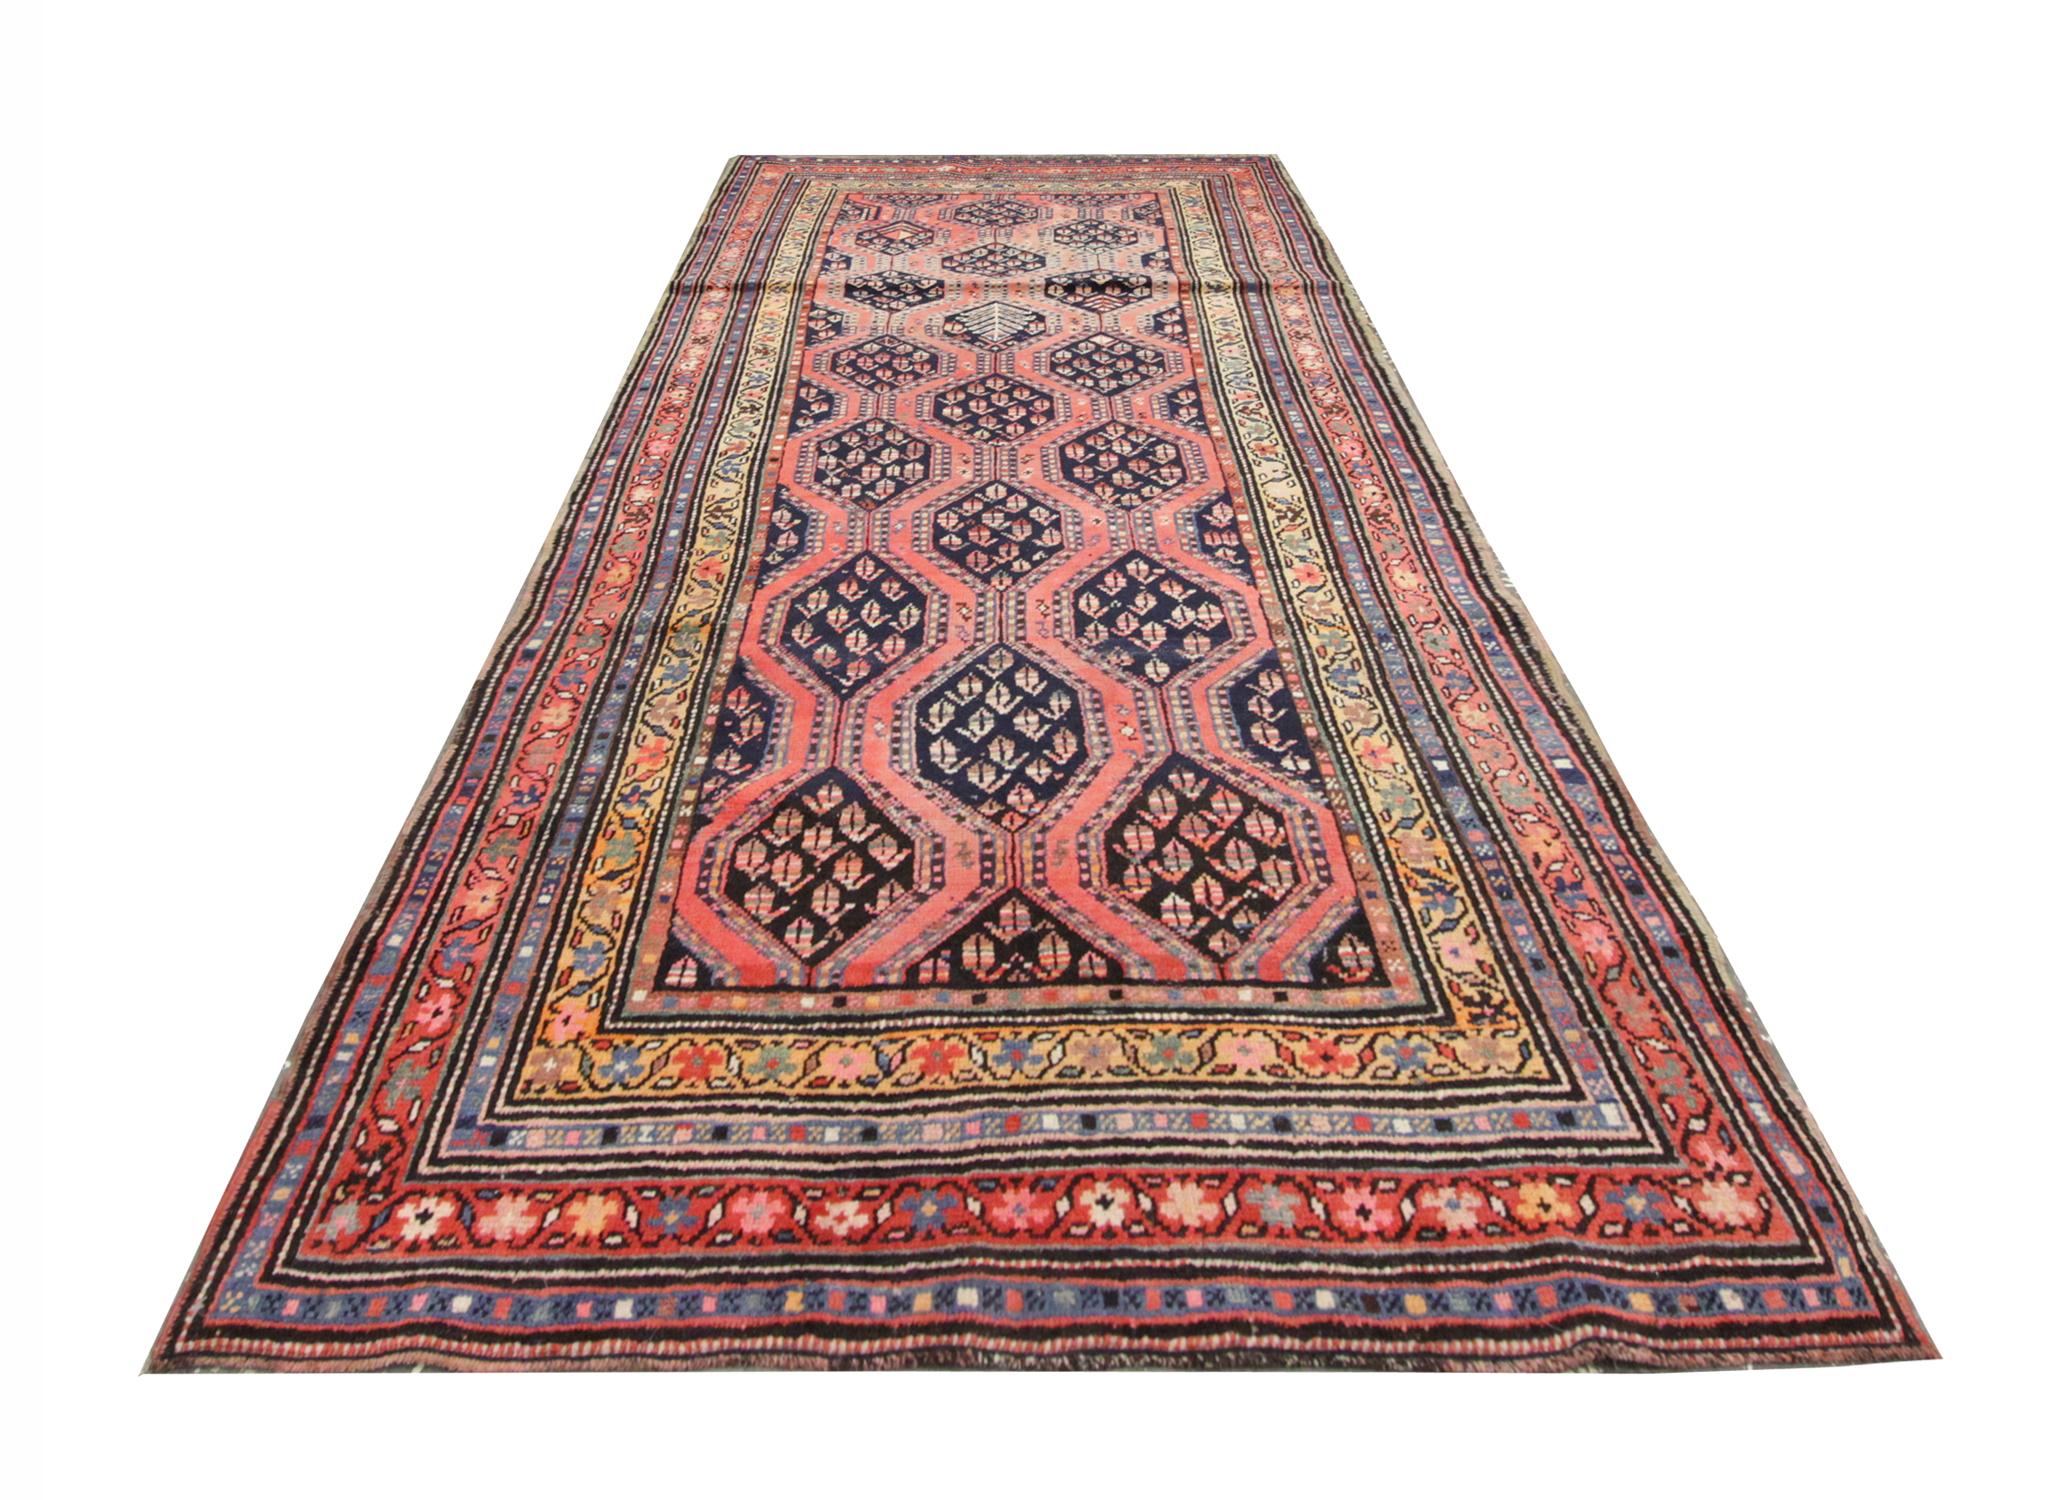 An excellent example of traditional Caucasian carpet Oriental rug weaving from the Kazak region. These Medallion ground design patterned rugs can be the best element of home decor objects to give warmth to the environment, because this woven rug has